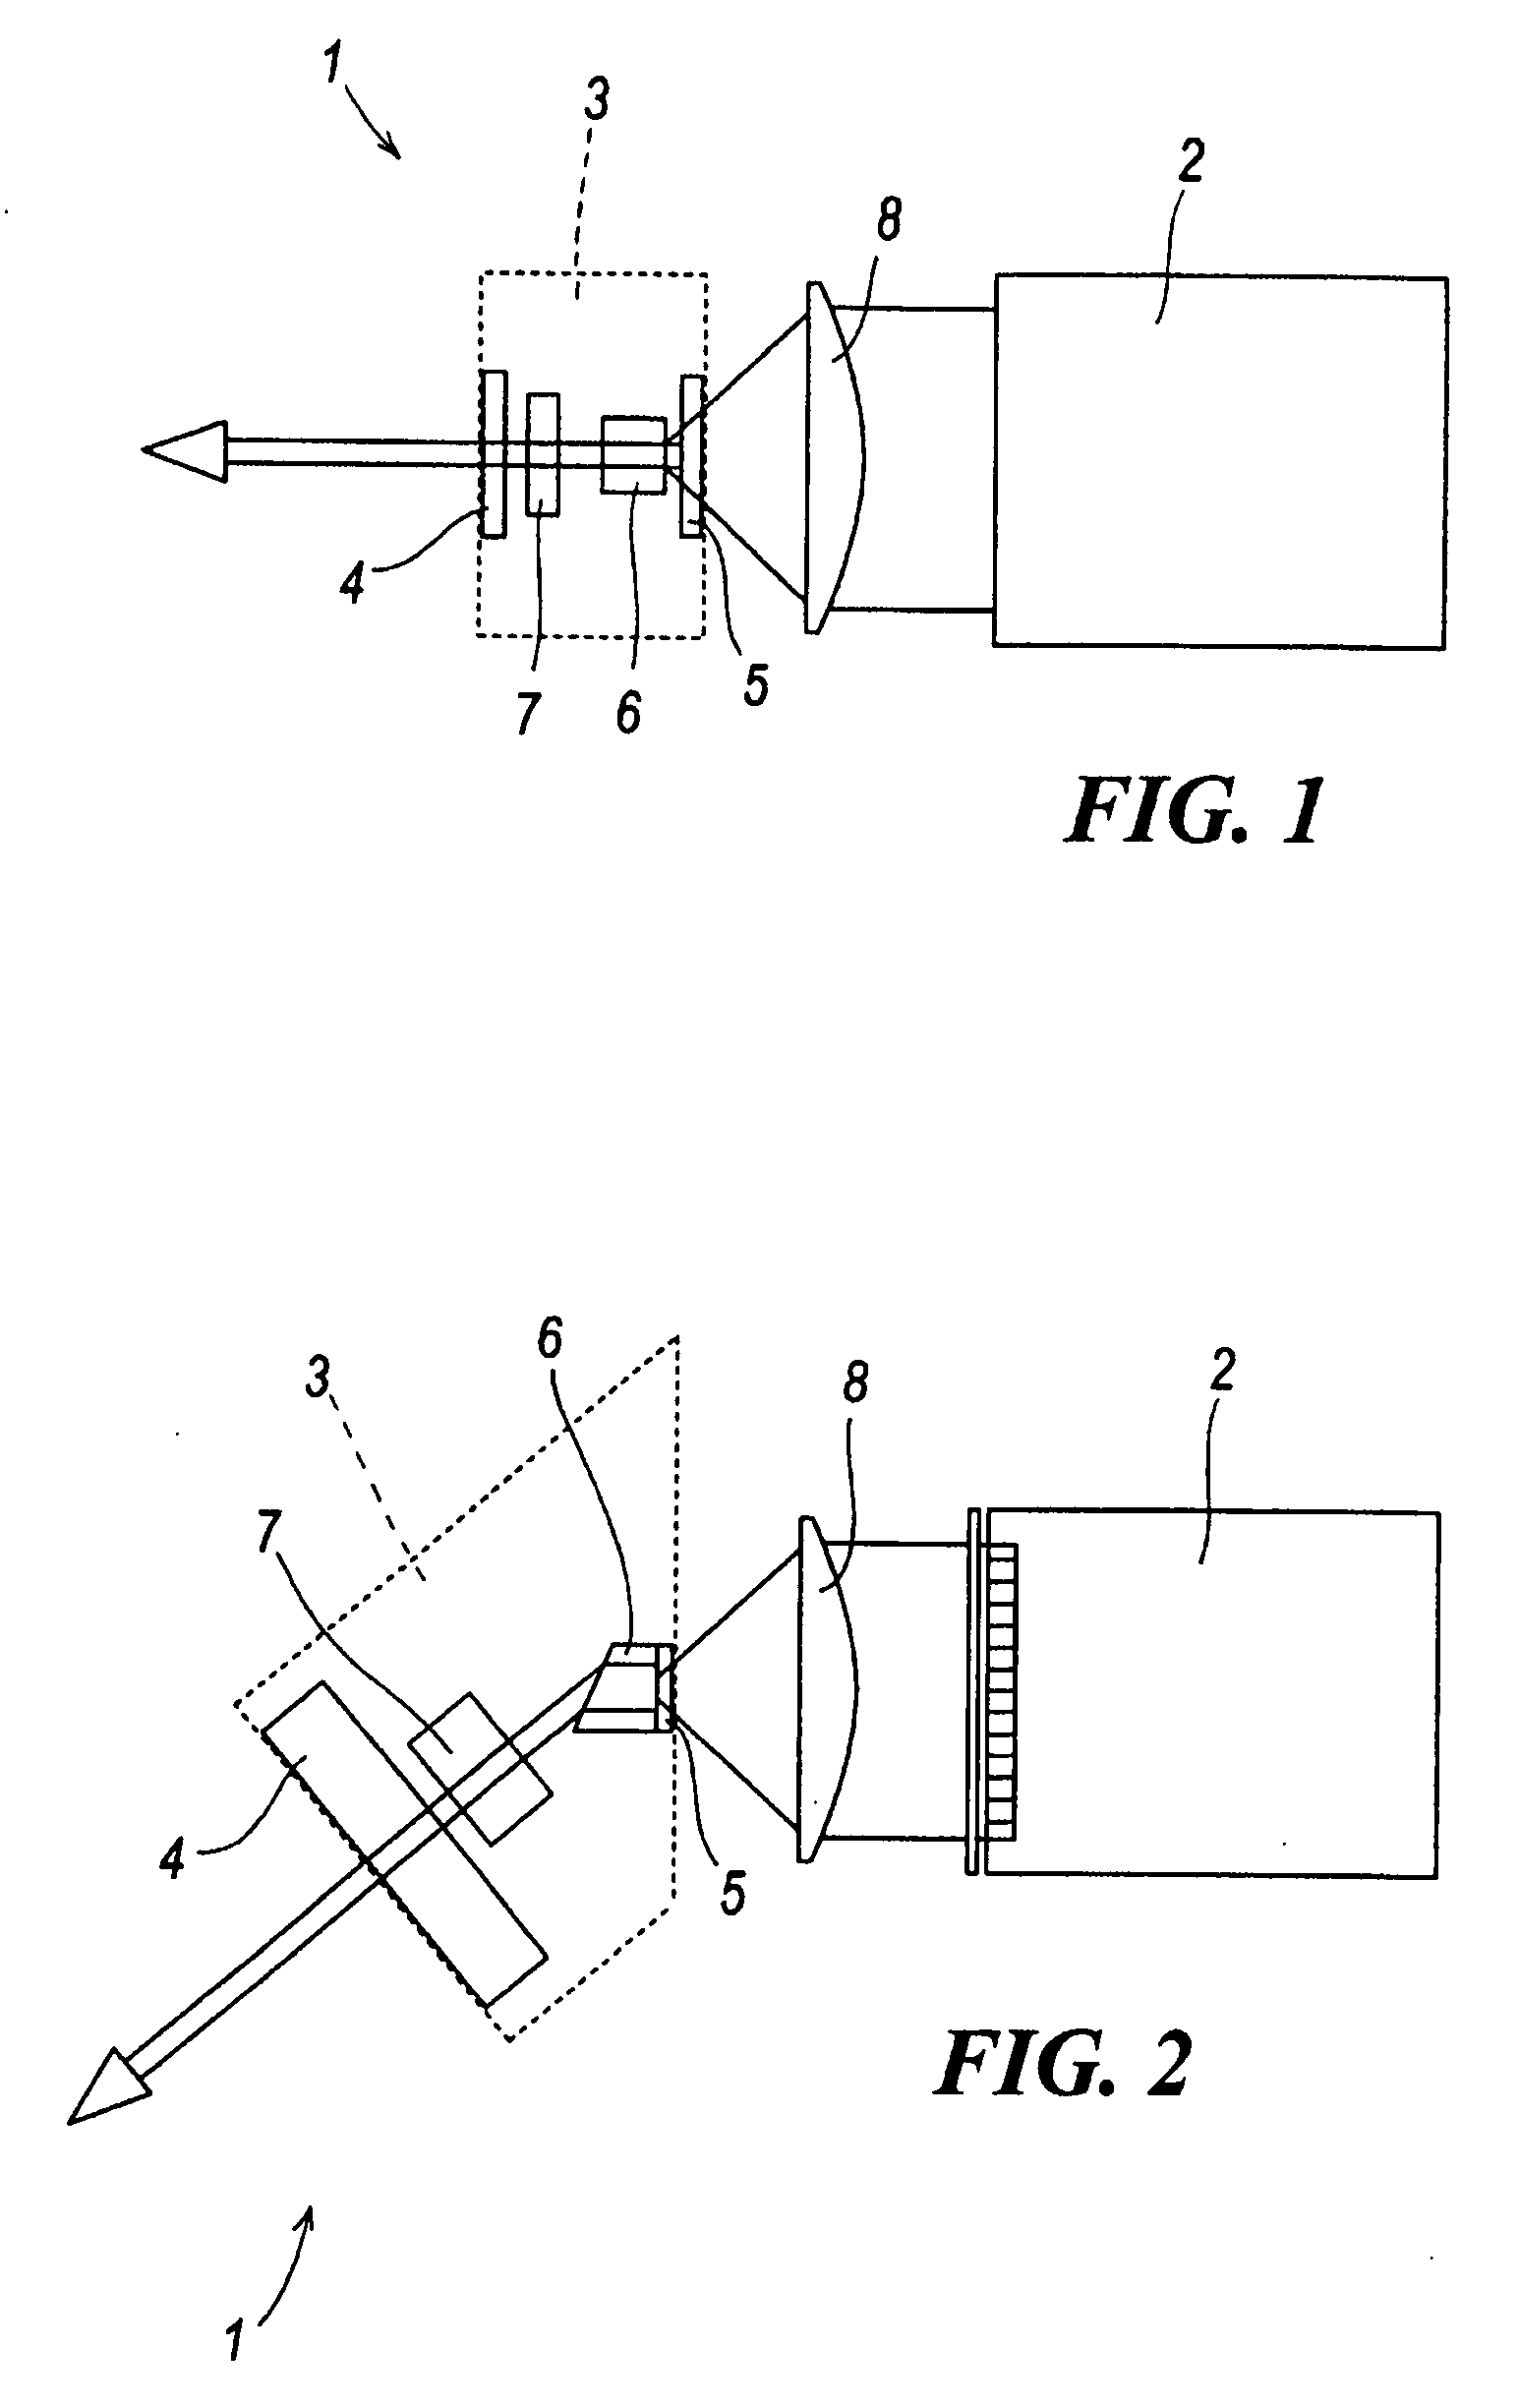 Laser apparatus for generating high energy pulses of short duration, and process for generating said laser pulse